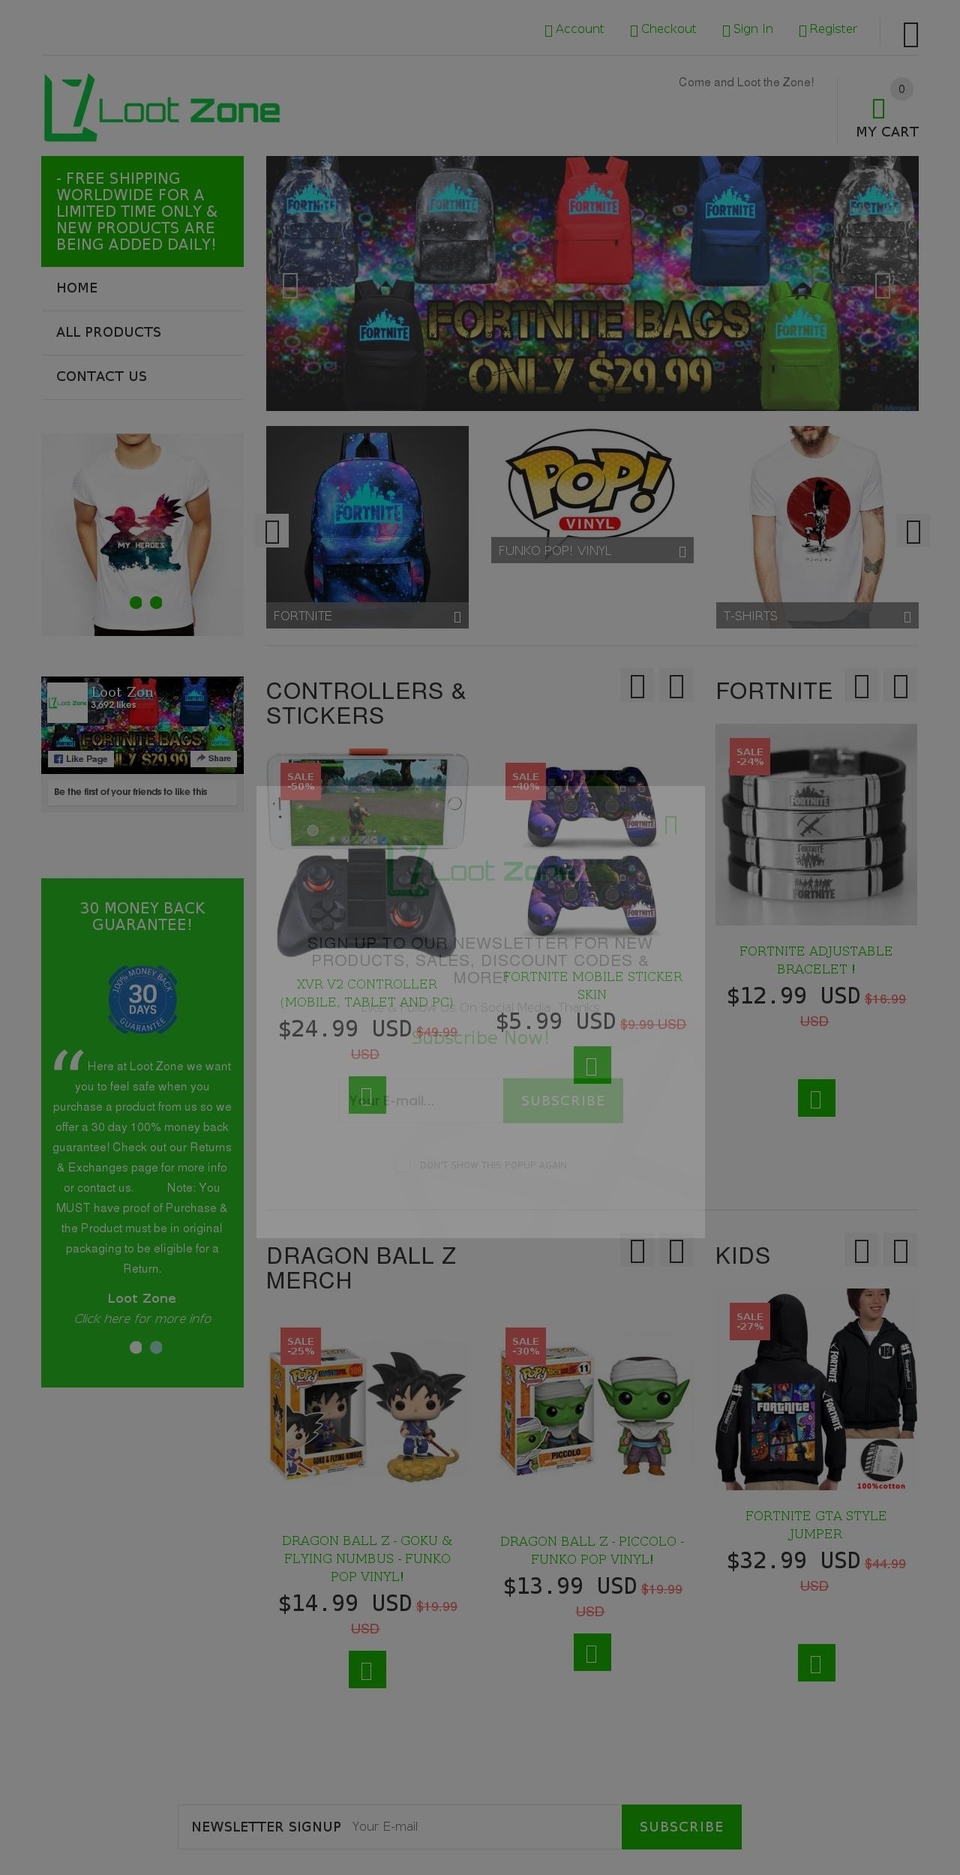 yourstore-v2-1-5 Shopify theme site example loot-zone.com